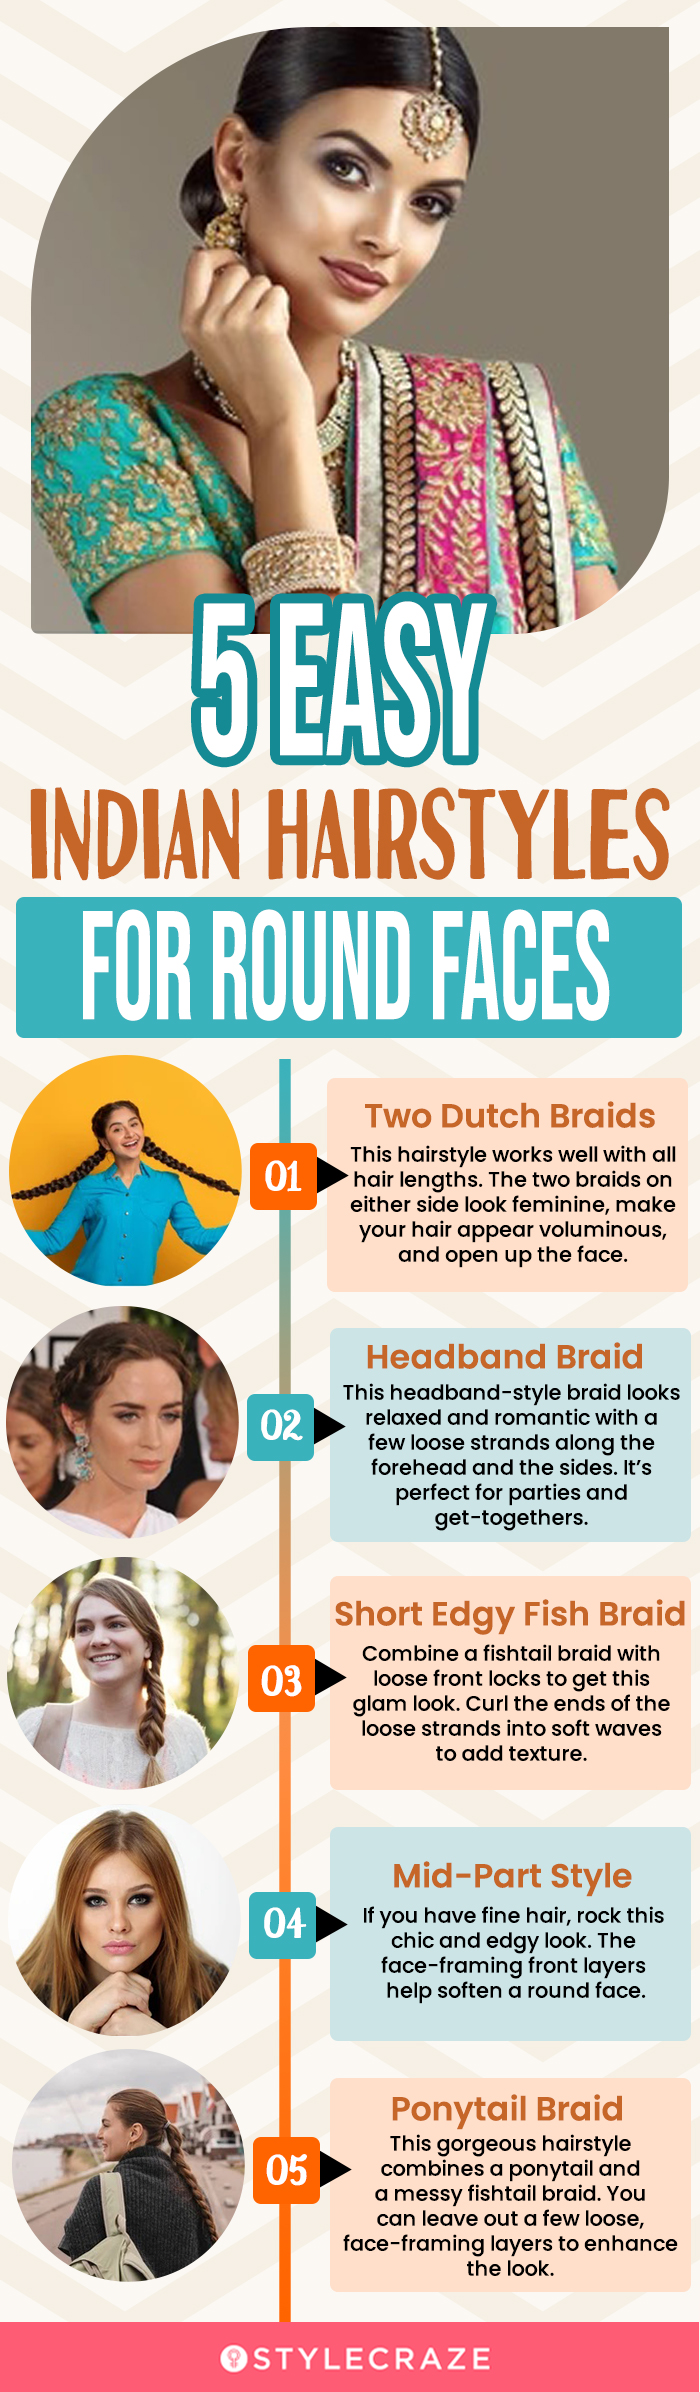 5 easy indian hairstyles for round faces (infographic)